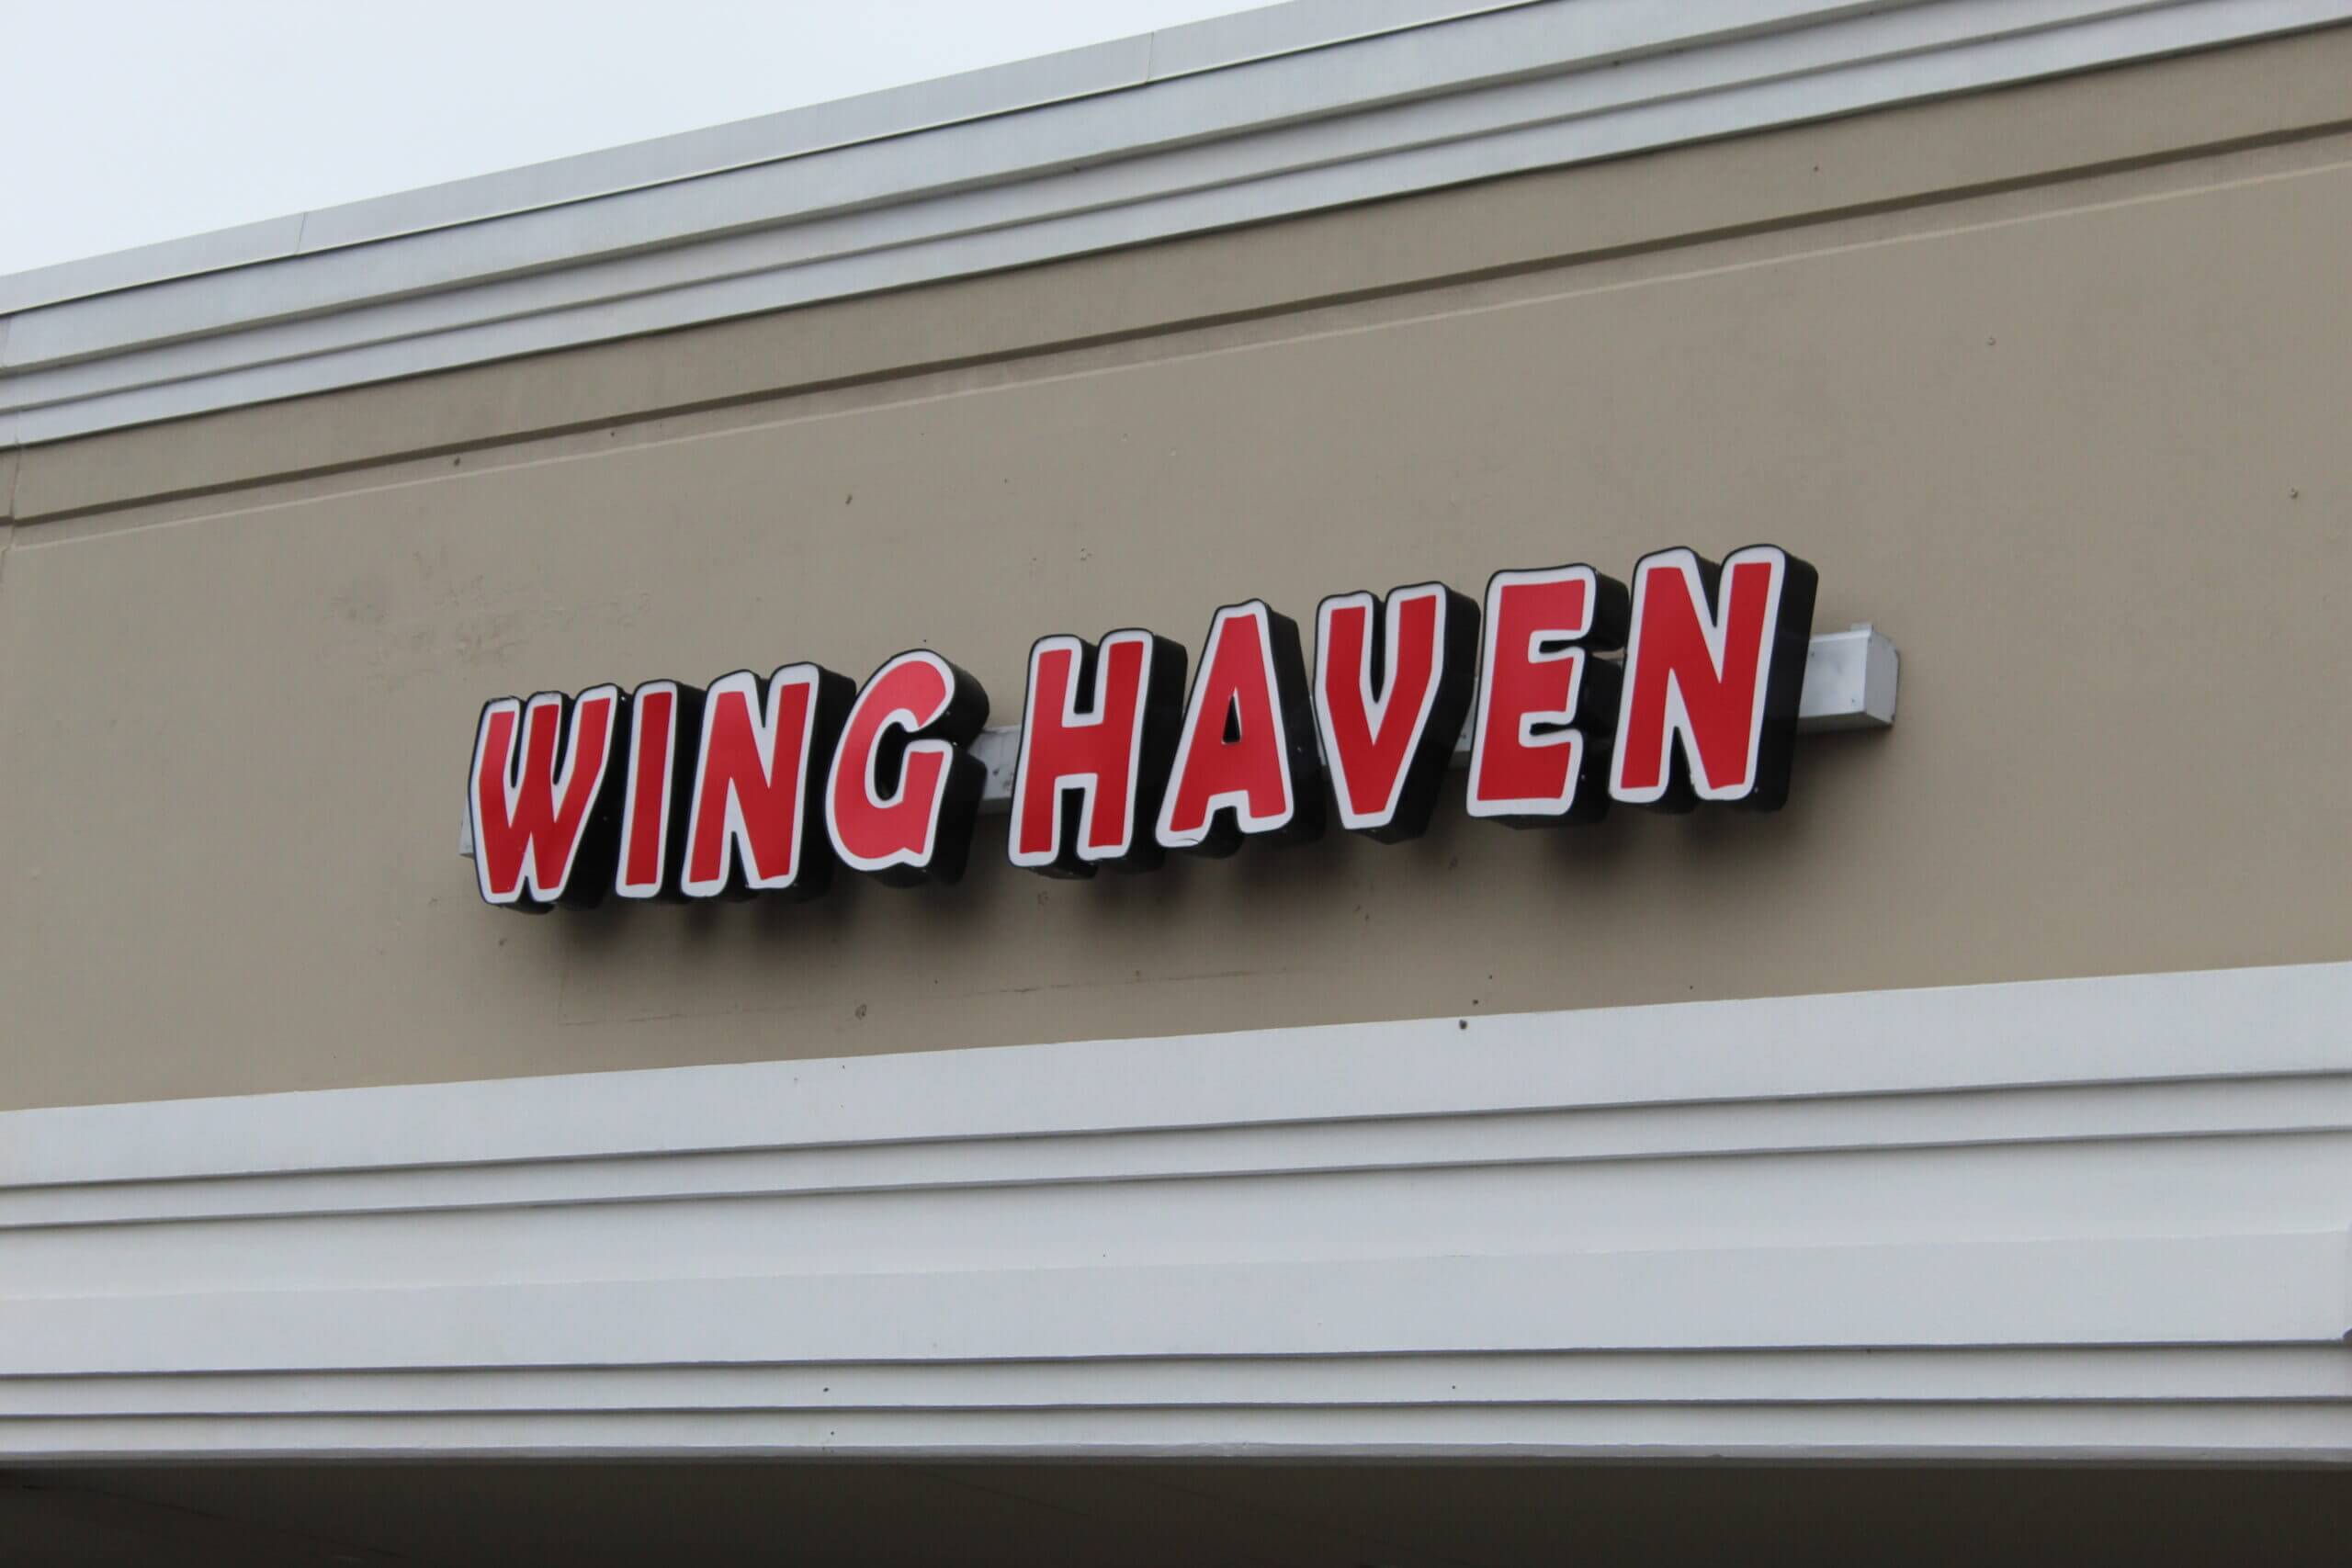 Welcome to Wing Haven